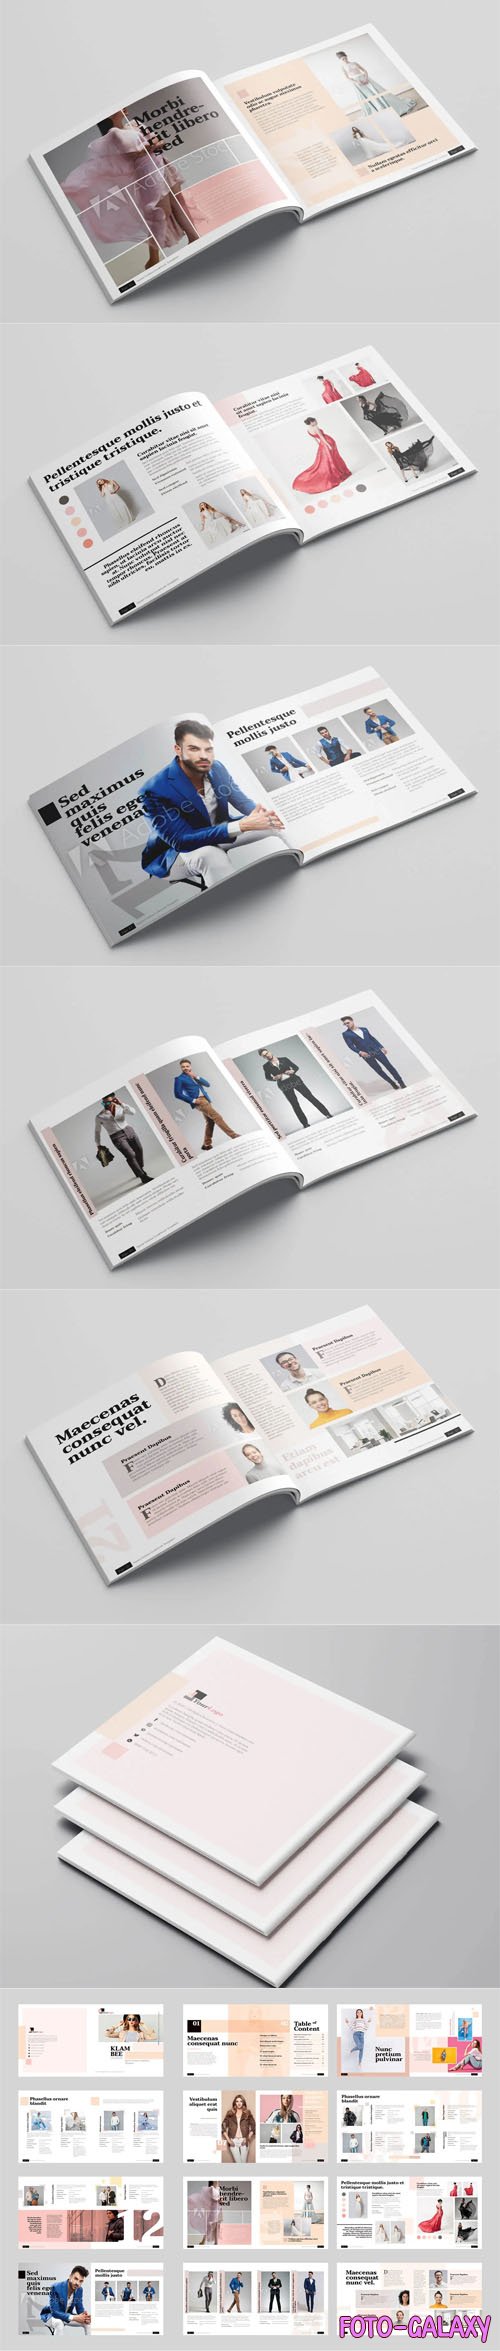 KLAMBEE - Square Fashion Lookbook INDD Template [24 Pages]